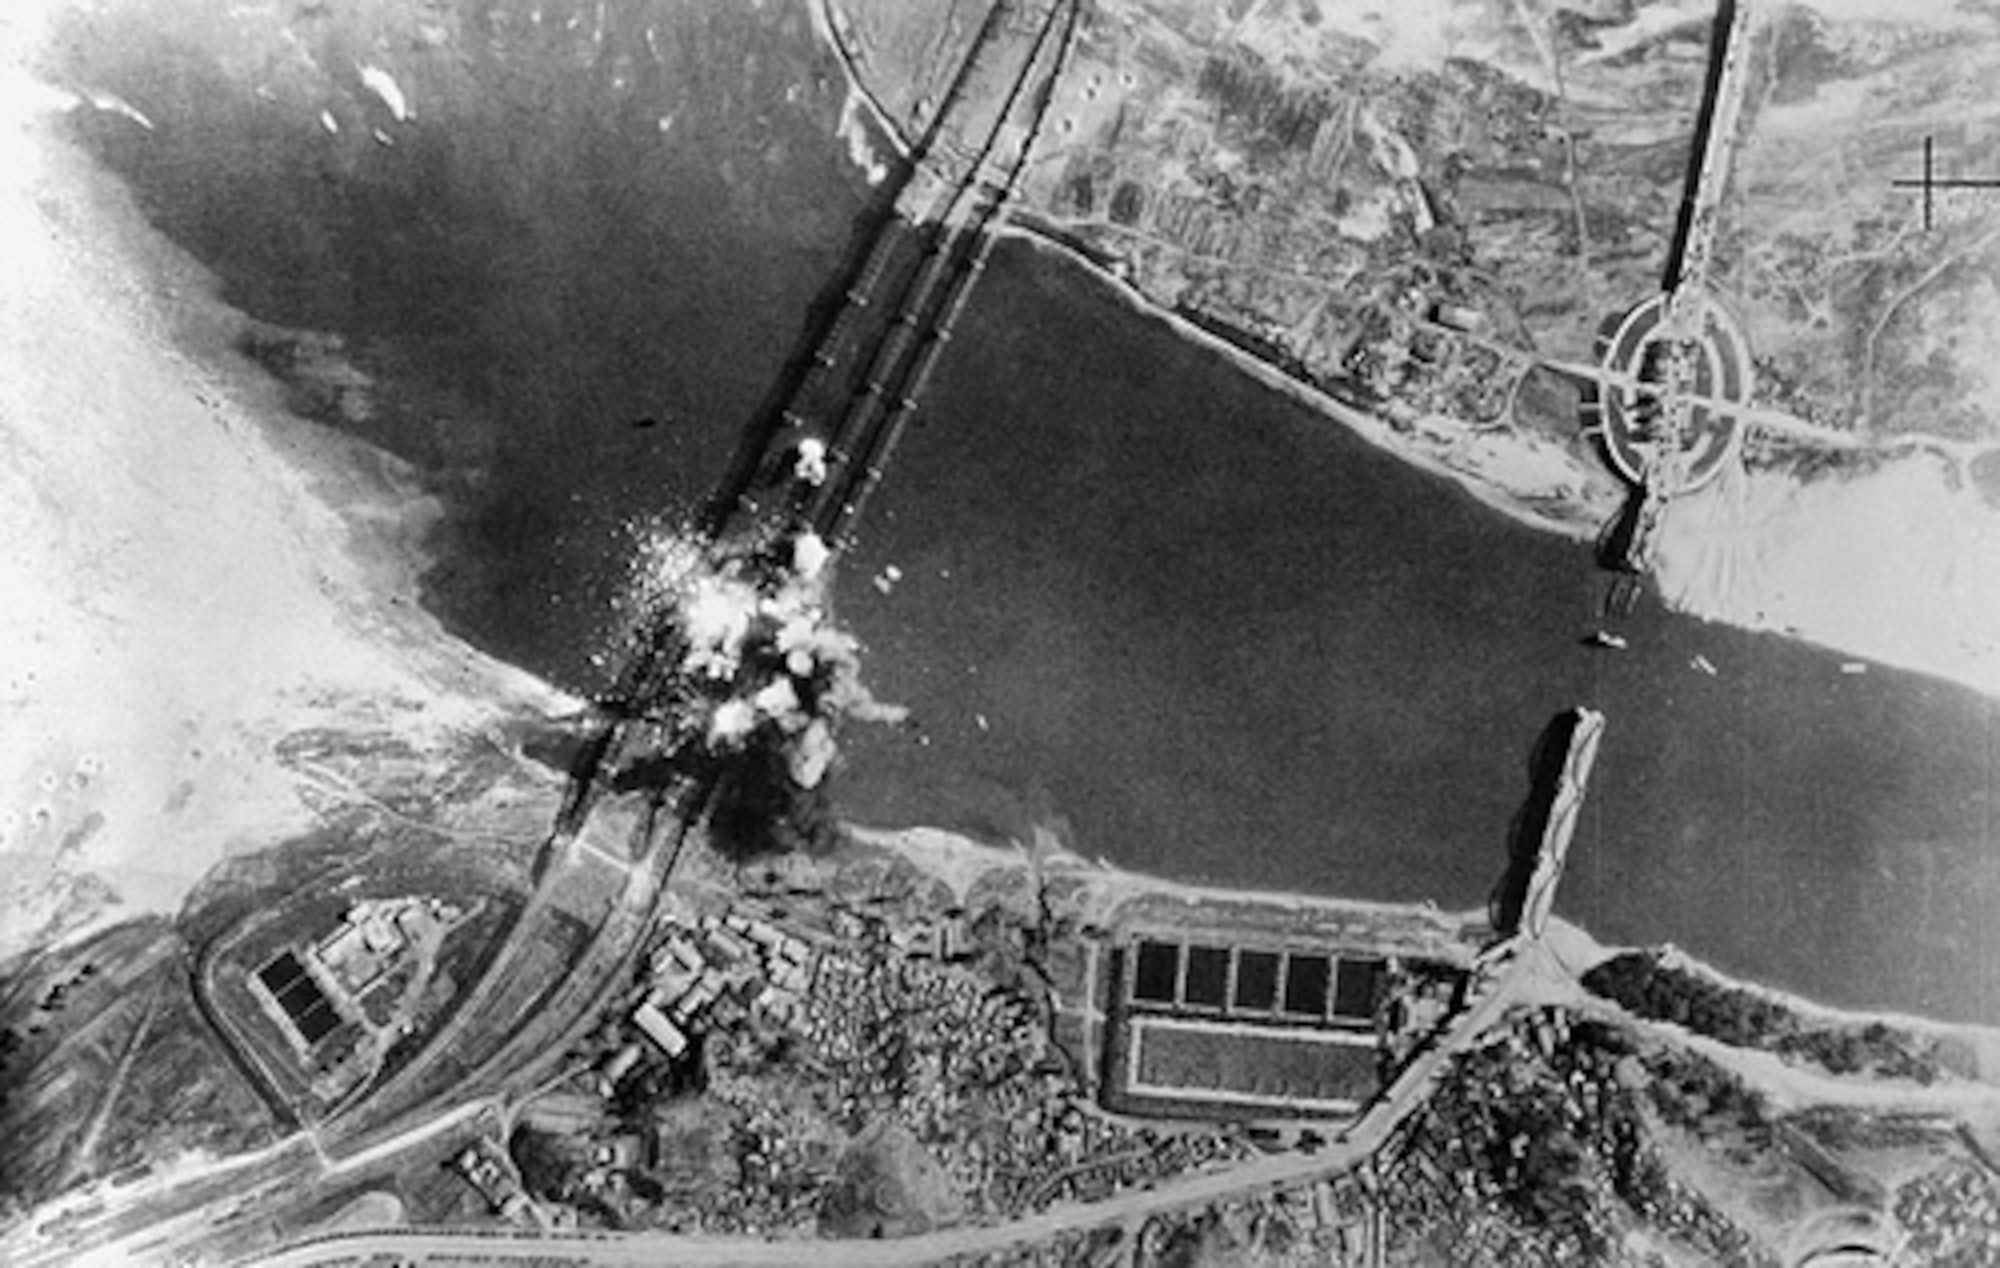 Air view of bombs dropped by U.S. Air Force, exploding on three parallel railroad bridges across Han River, southwest of Seoul, capital of the Republic of Korea. Bridges were bombed early in war to delay advance of invading North Korean troops. (DoD/National Air and Space Museum, #50-9025-306-PS)